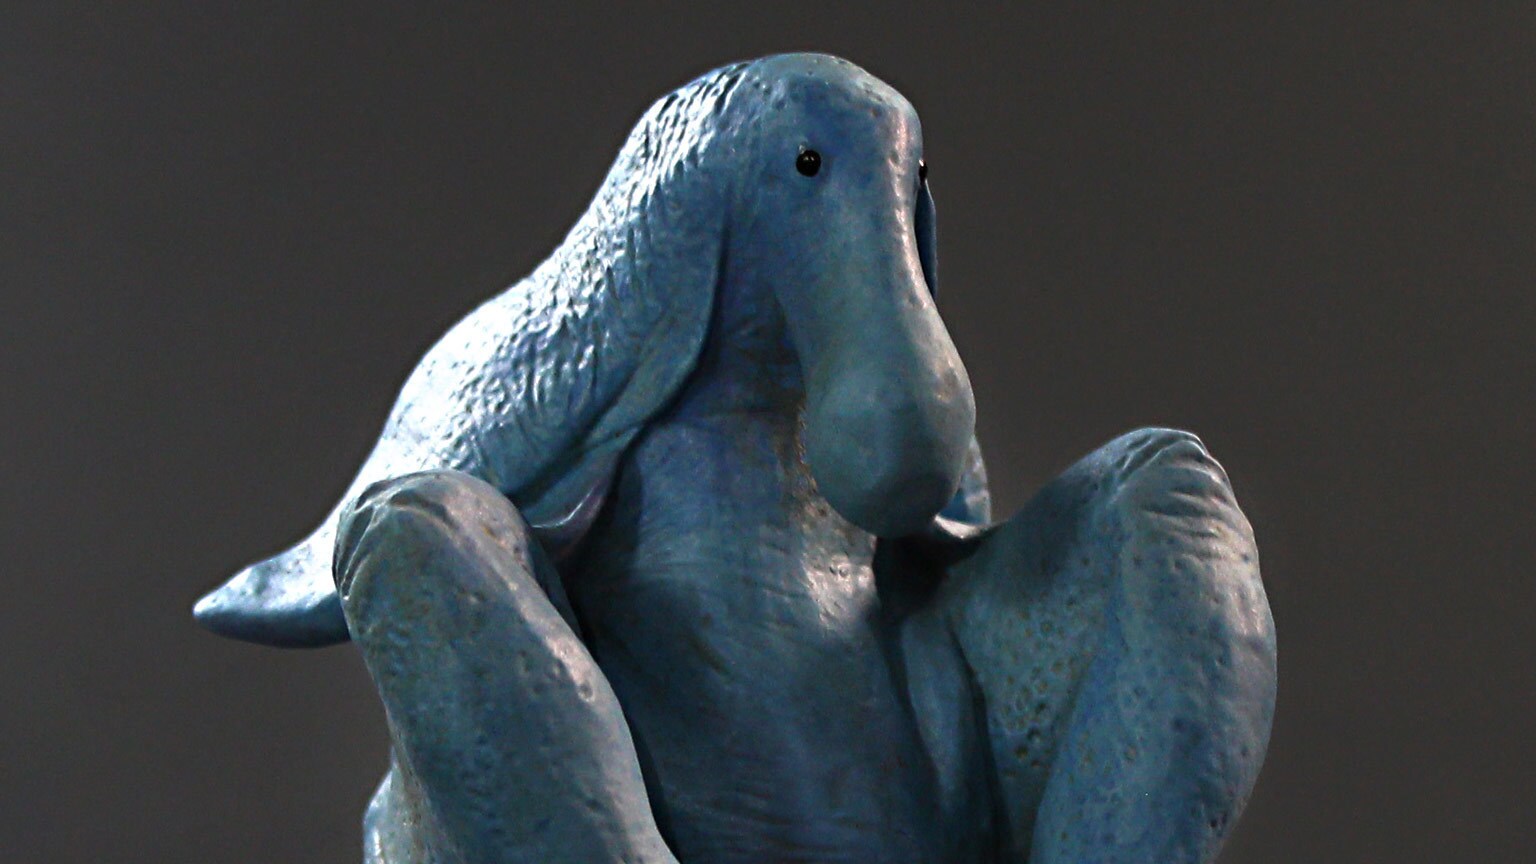 “Everybody Loves Max Rebo”: Regal Robot’s Archive Collection Launches with Red Ball Jett Maquette – Exclusive Reveal